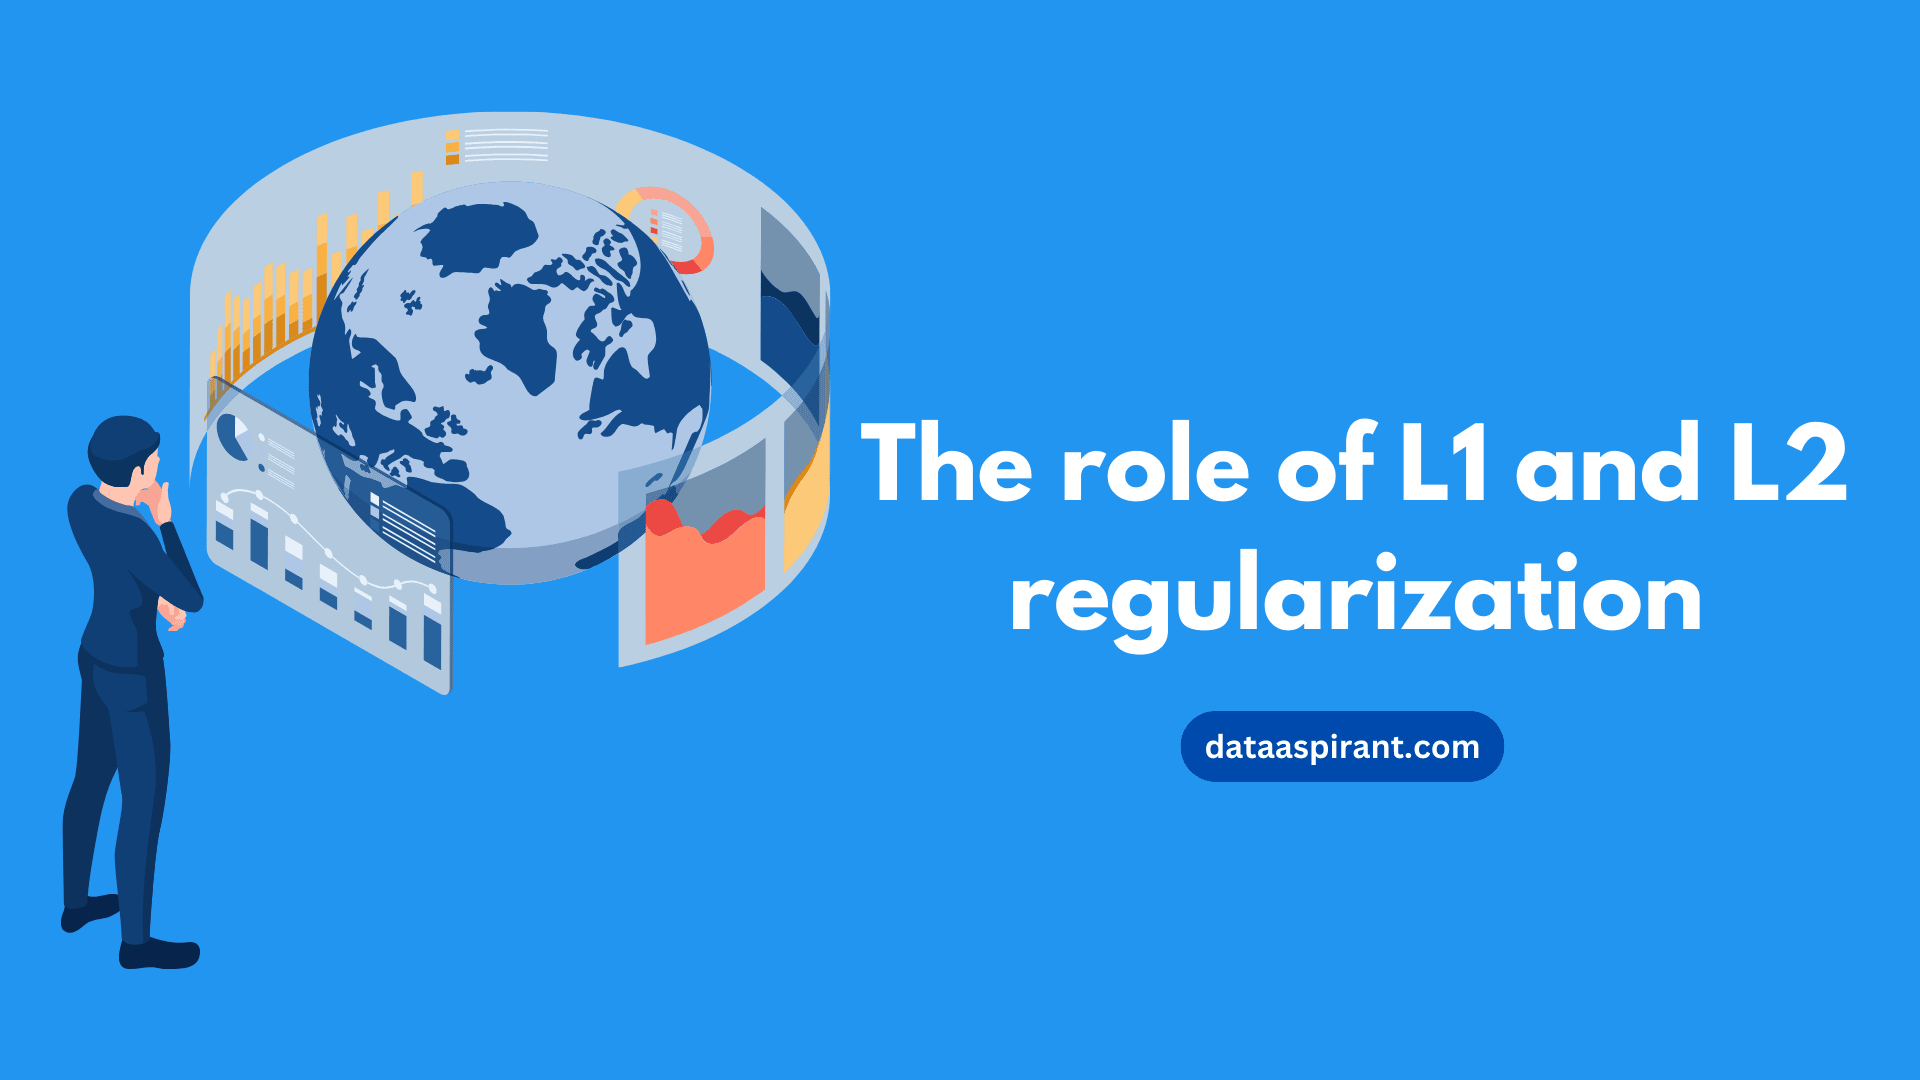 The role of L1 and L2 regularization